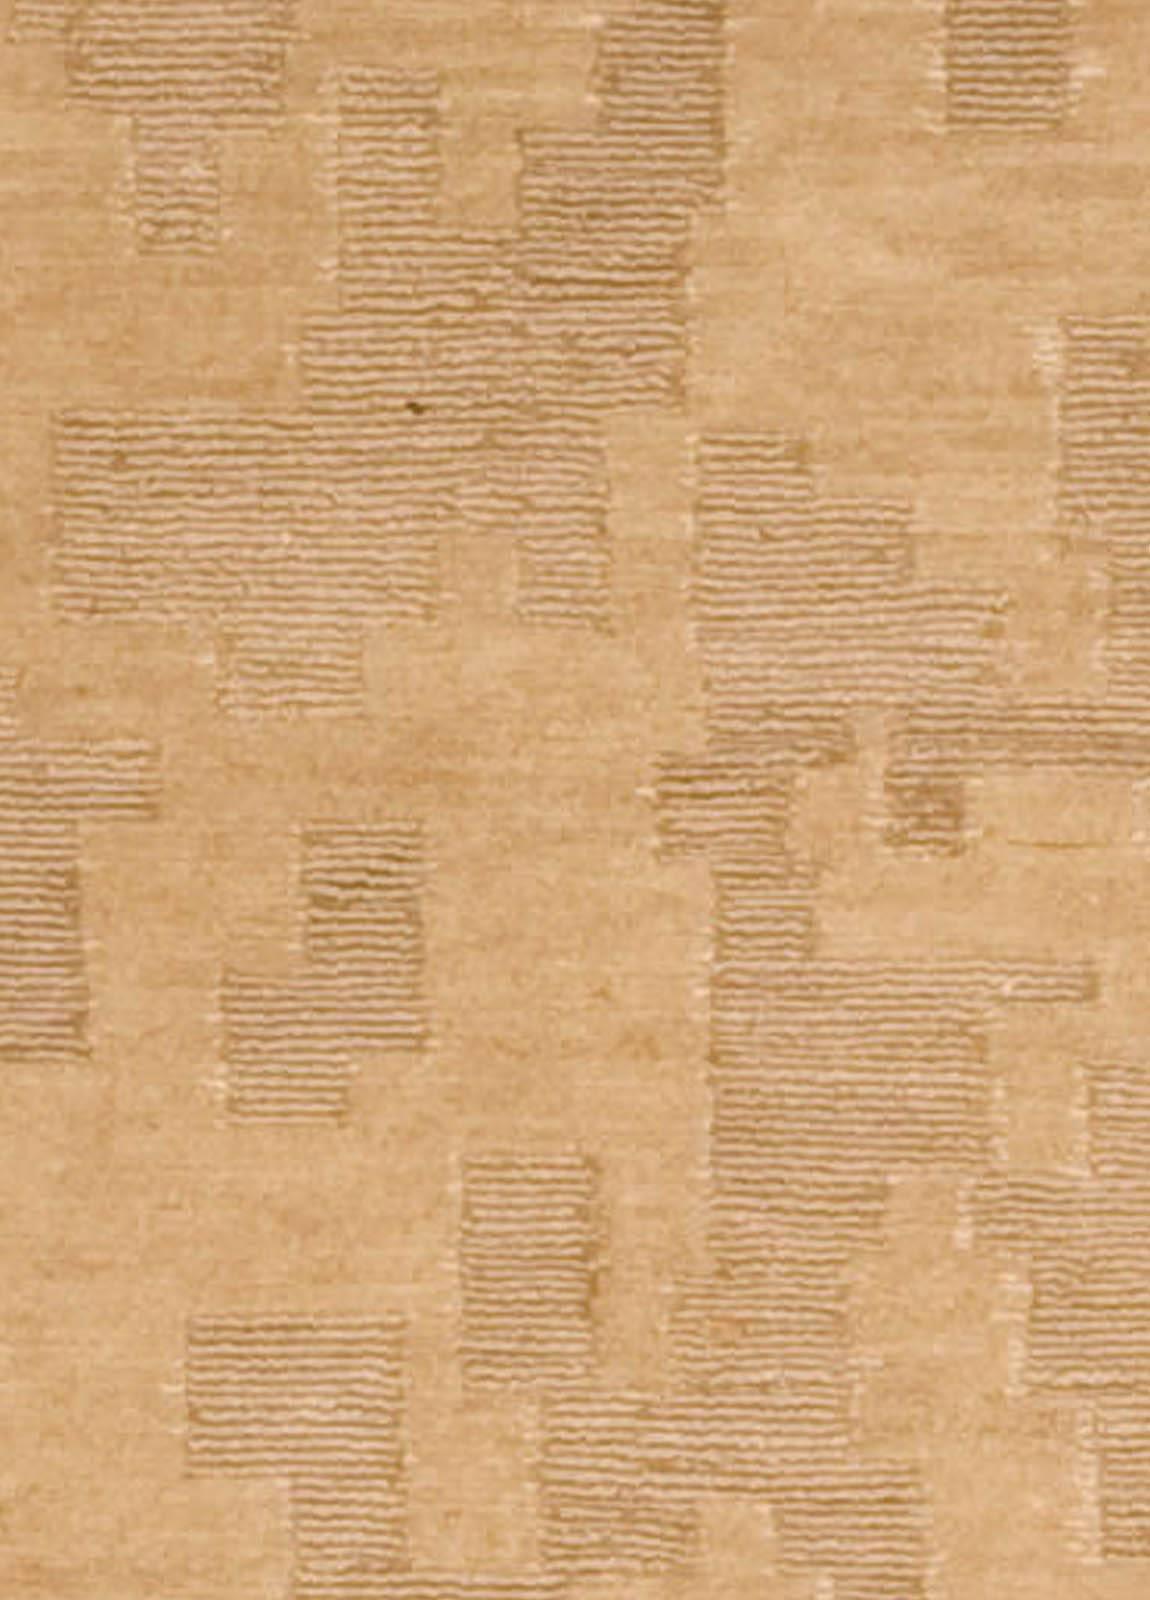 Doris Leslie Blau collection 'AD4' golden beige and brown handmade rug by Arthur Dunnam
Size: 4'0